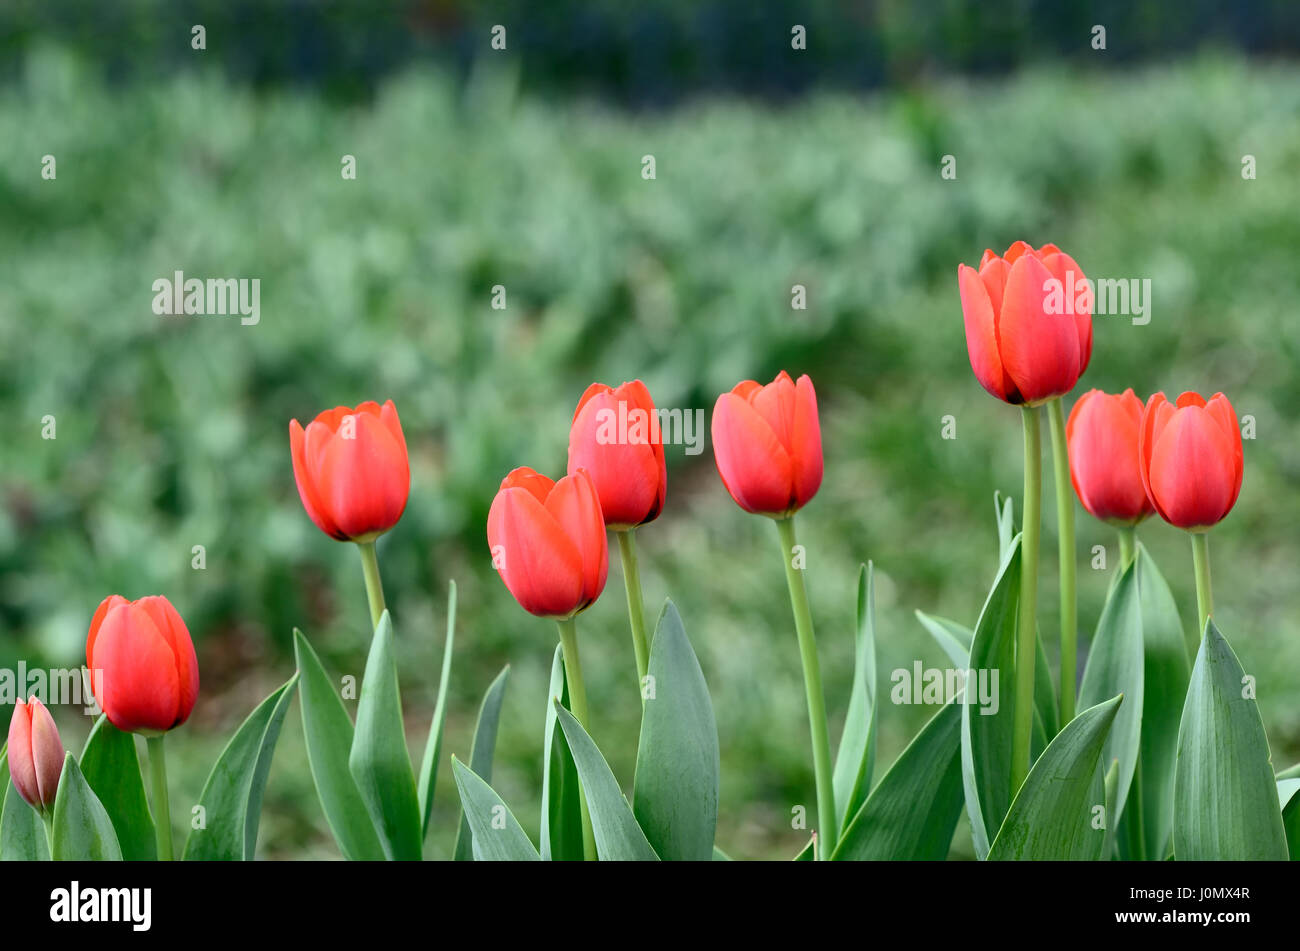 Red tulips with green background soft focus Stock Photo